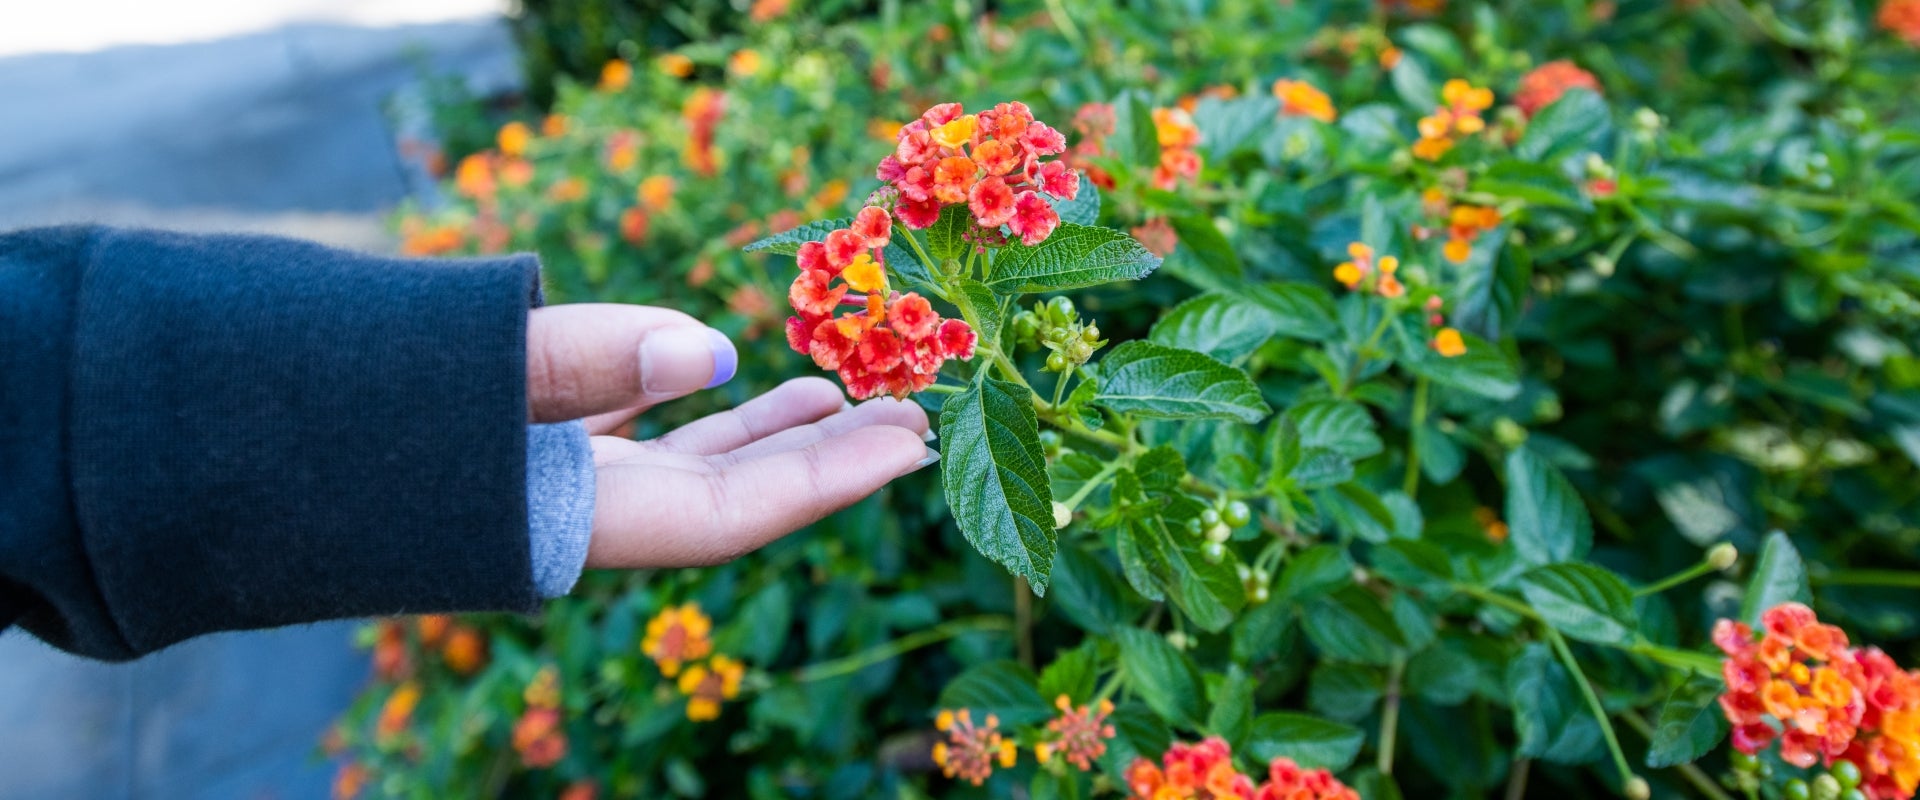 A hand reaches towards a pink and yellow Mexican butterfly weed with small blooms.